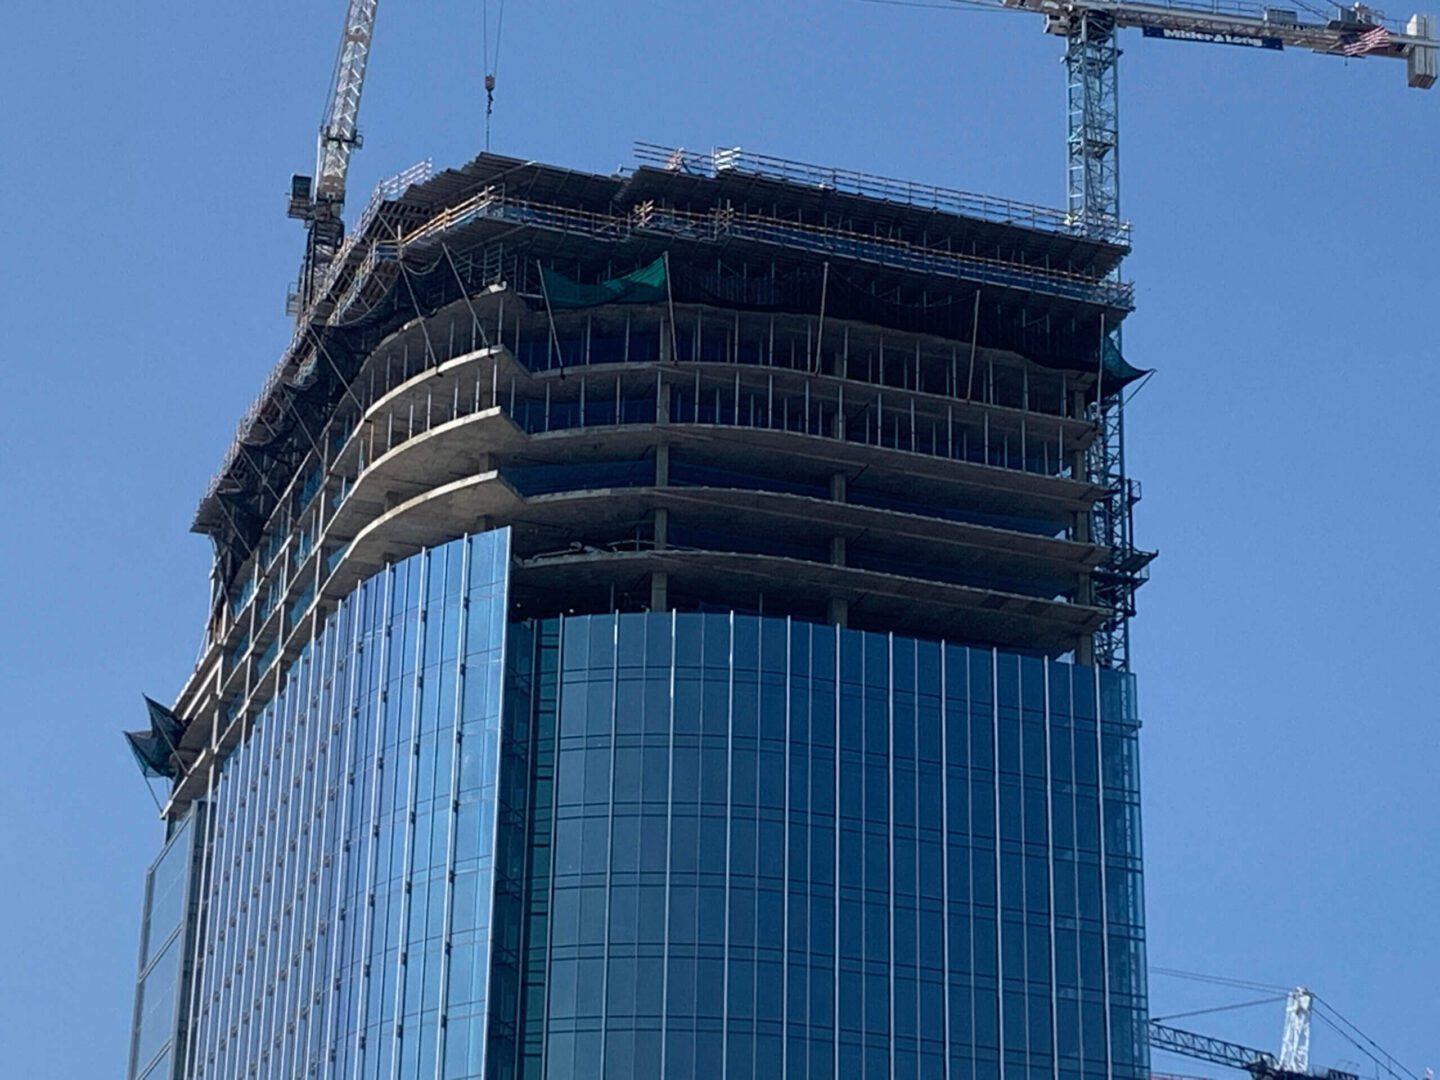 A high-rise commercial building under construction, featuring Personnel Safety Netting Systems from Safeline-FP for construction safety.